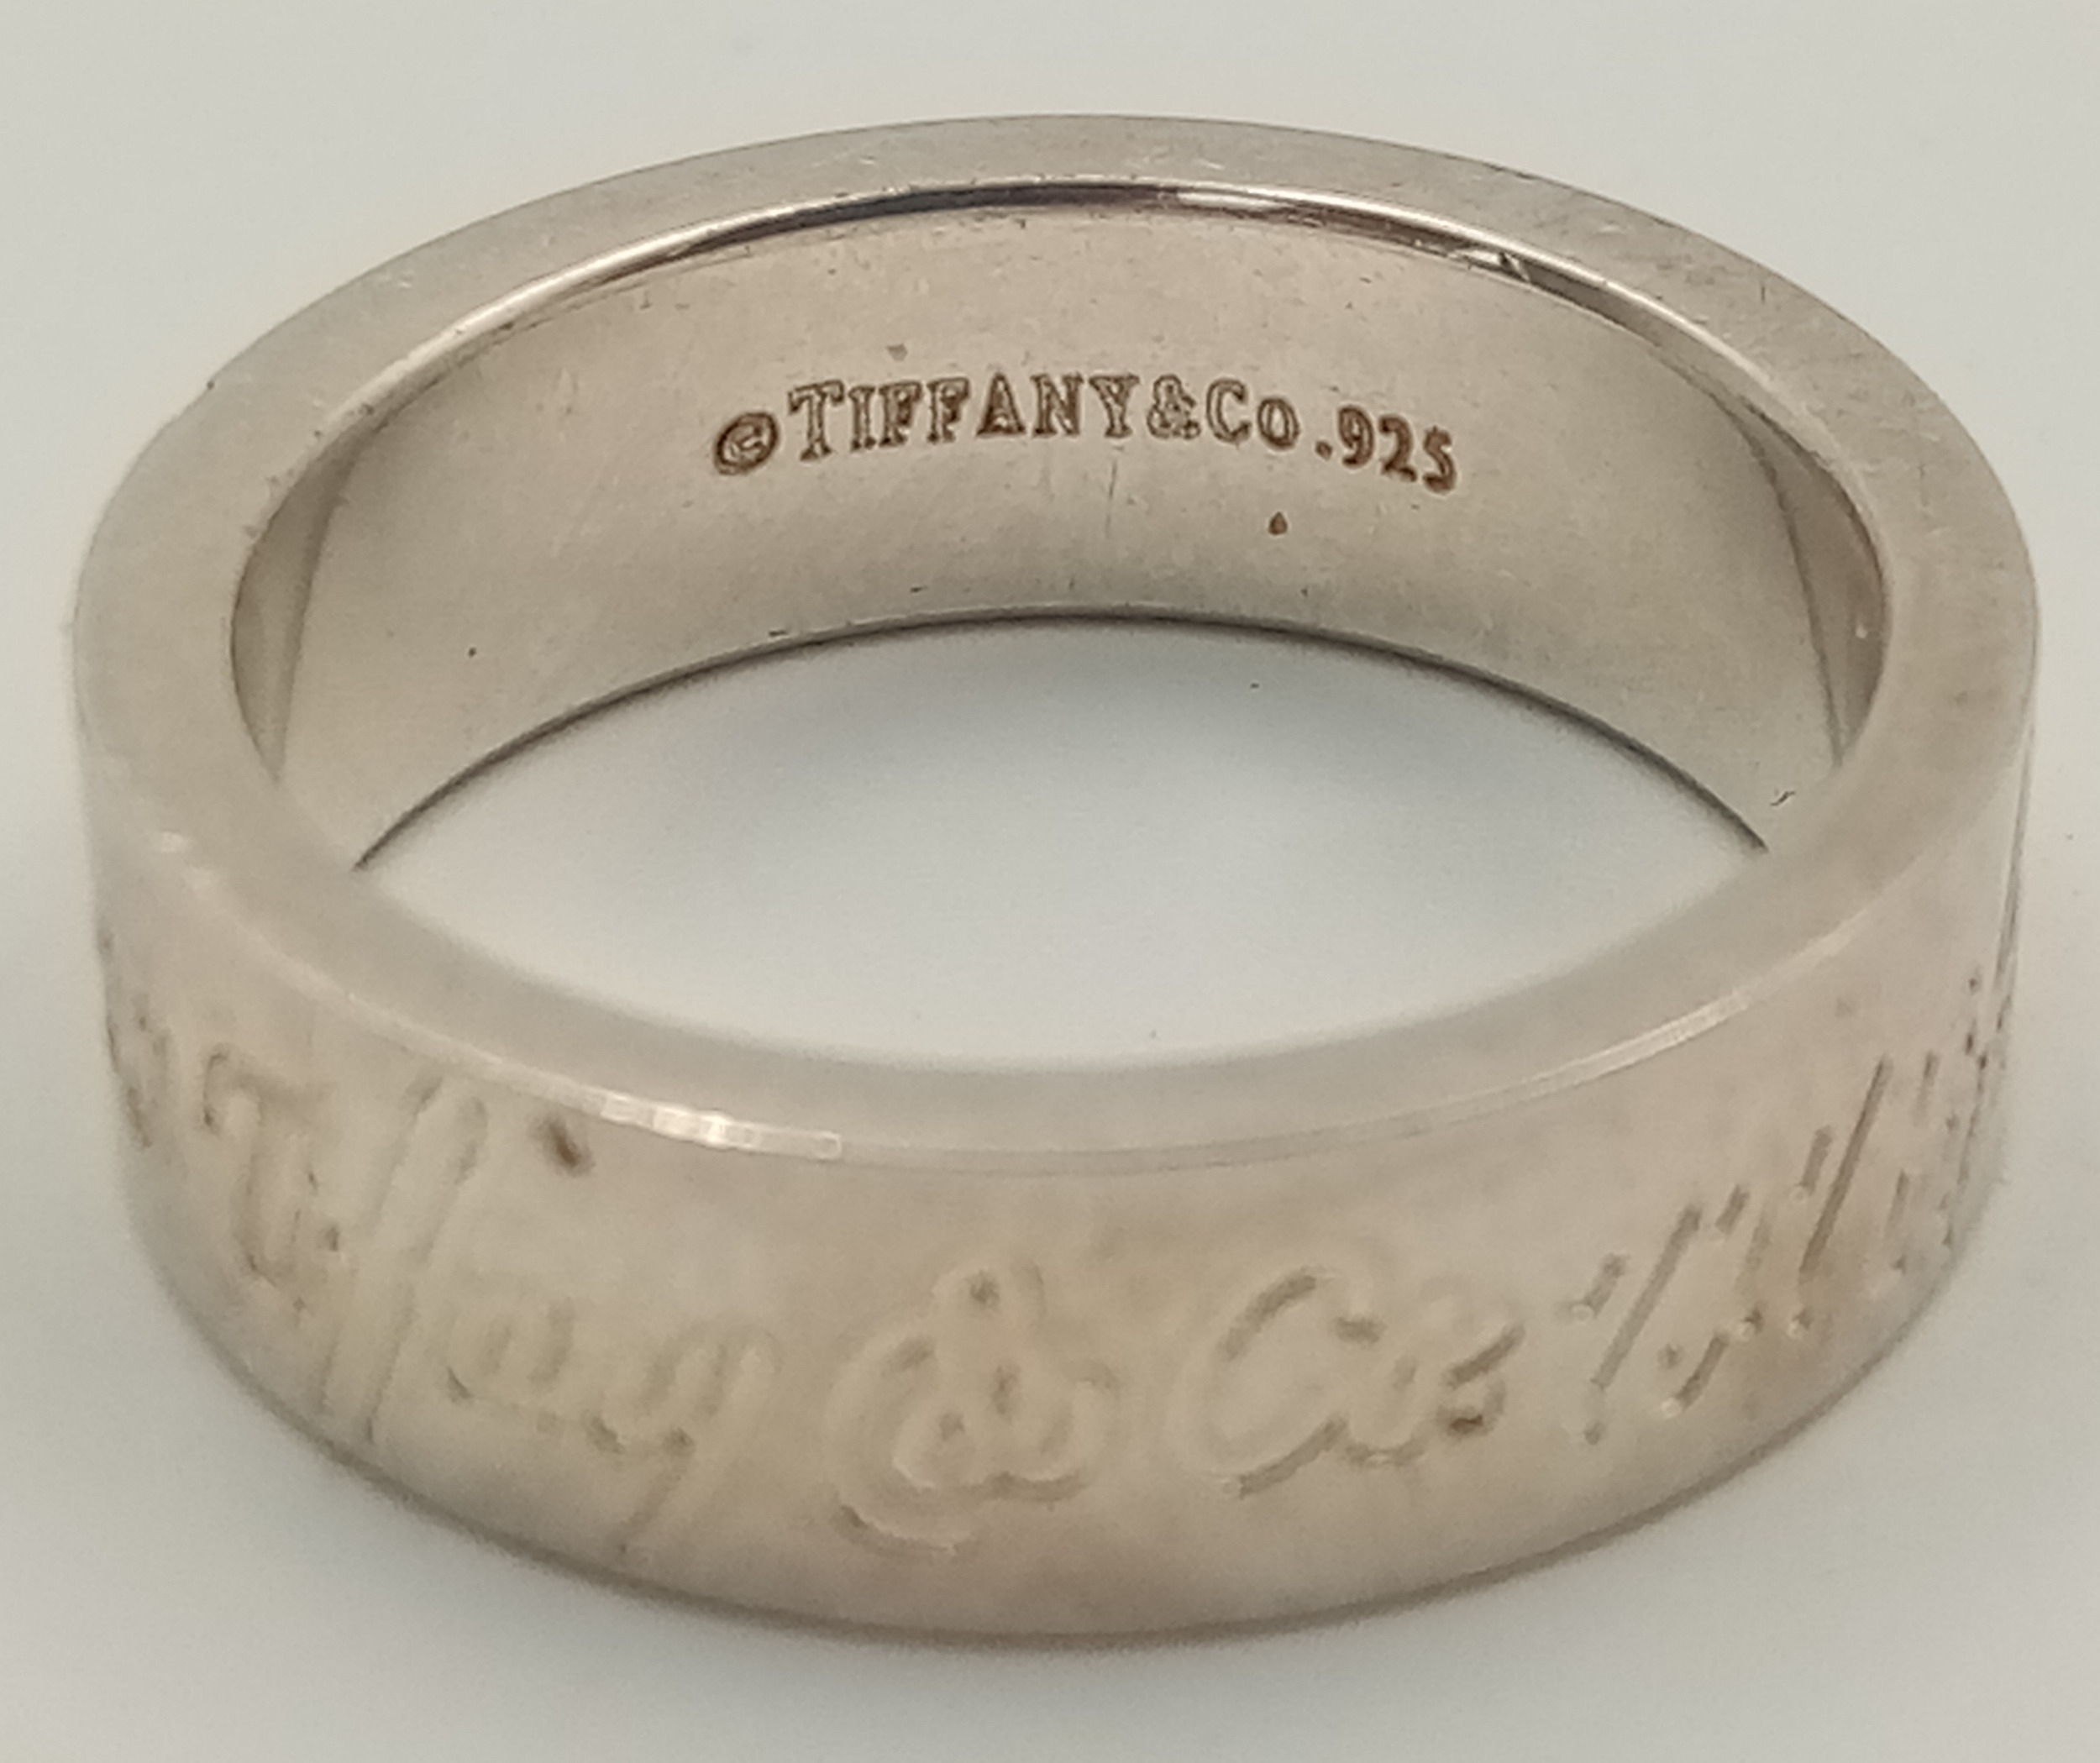 A TIFFANY & CO STERLING SILVER BAND RING, 727 NEW YORK FIFTH AVENUE. Size N, 5g total weight. Ref: - Image 2 of 5